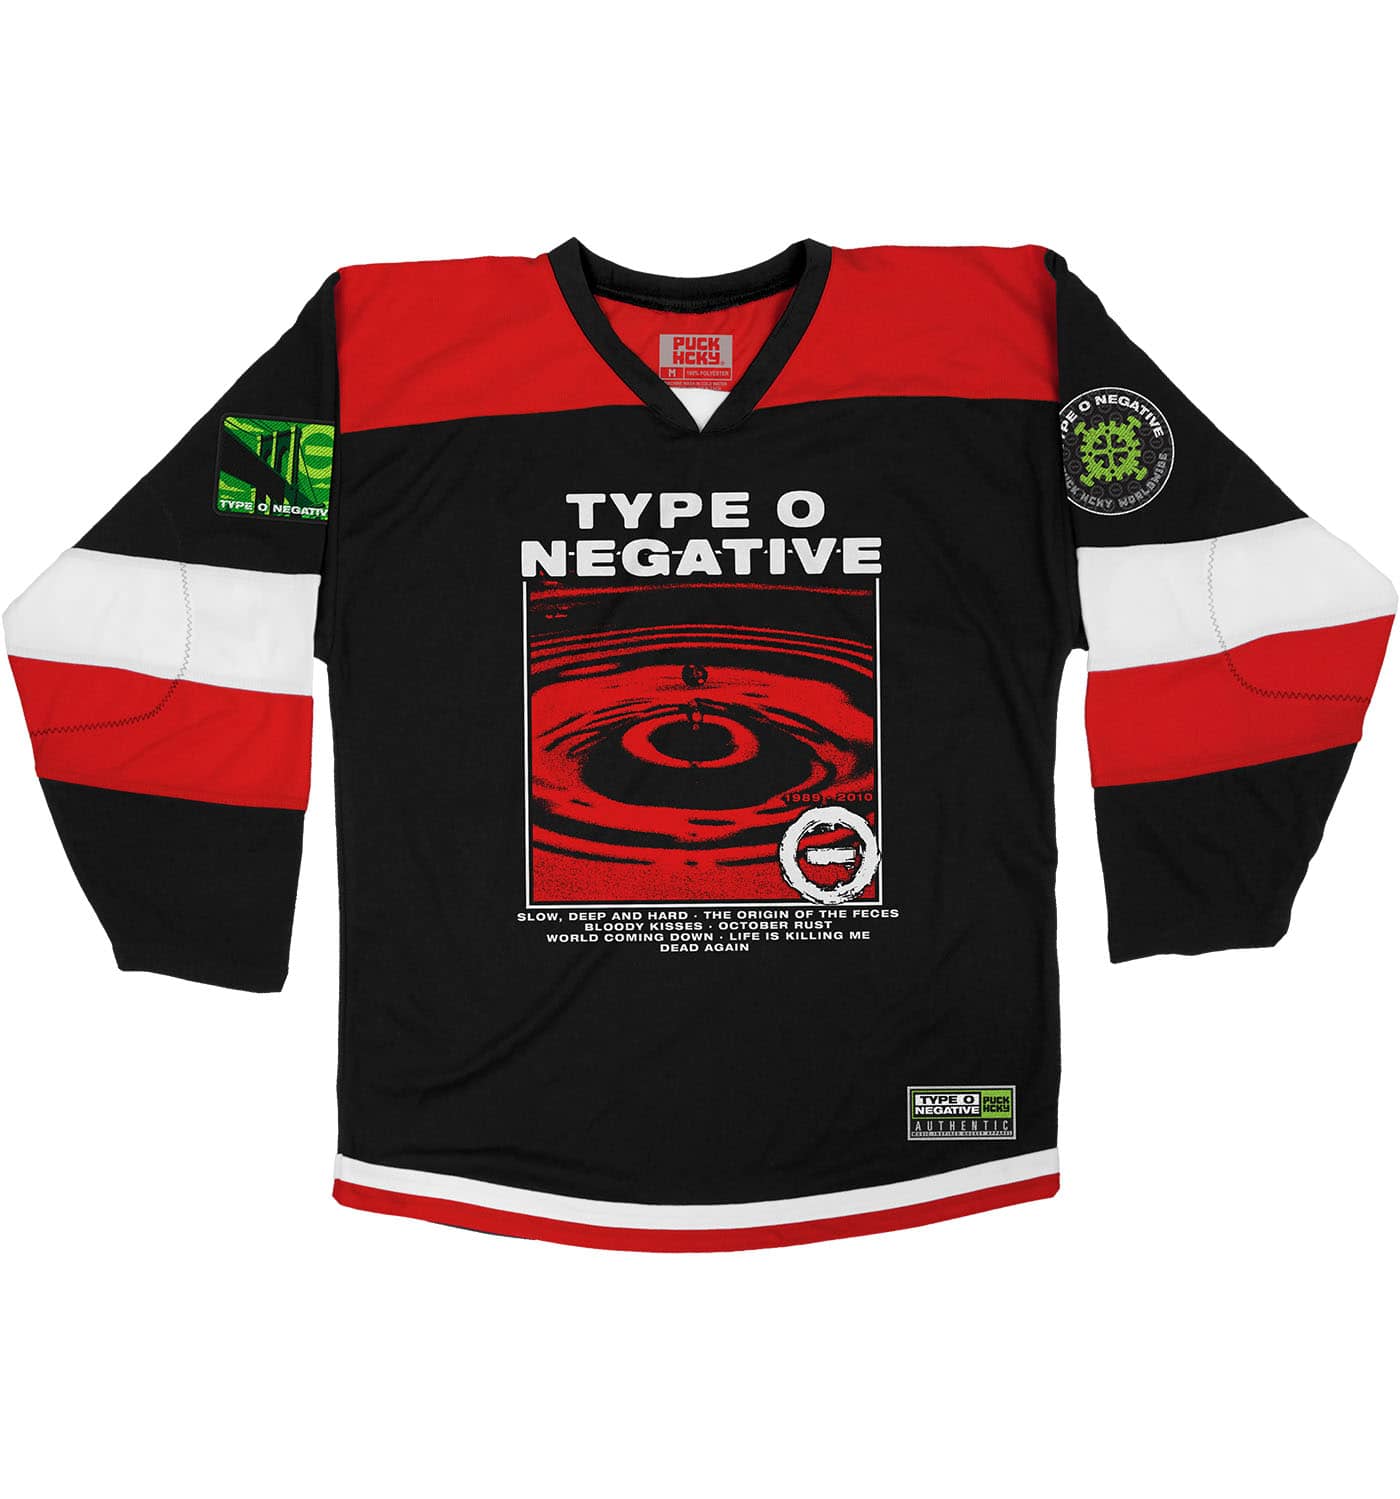 TYPE O NEGATIVE 'DISCOG' hockey jersey in black, red, and white front view